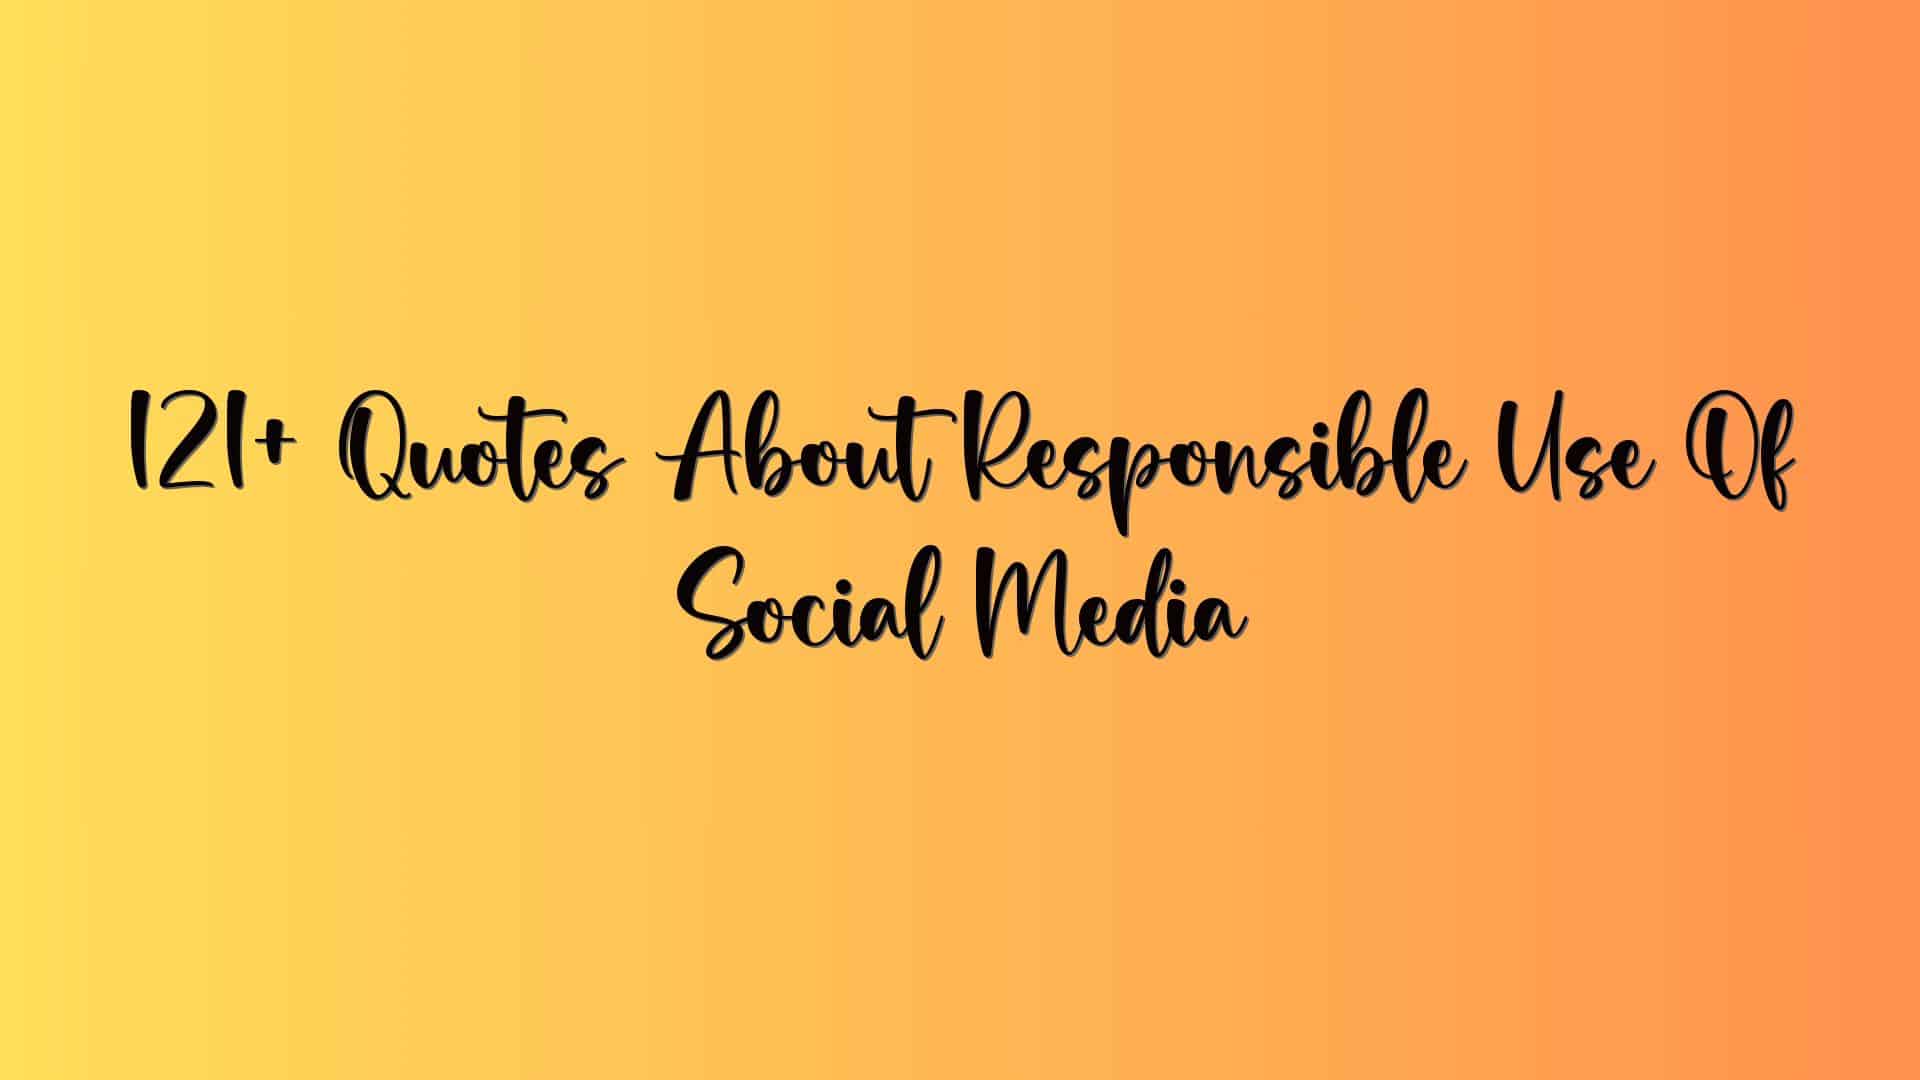 121+ Quotes About Responsible Use Of Social Media